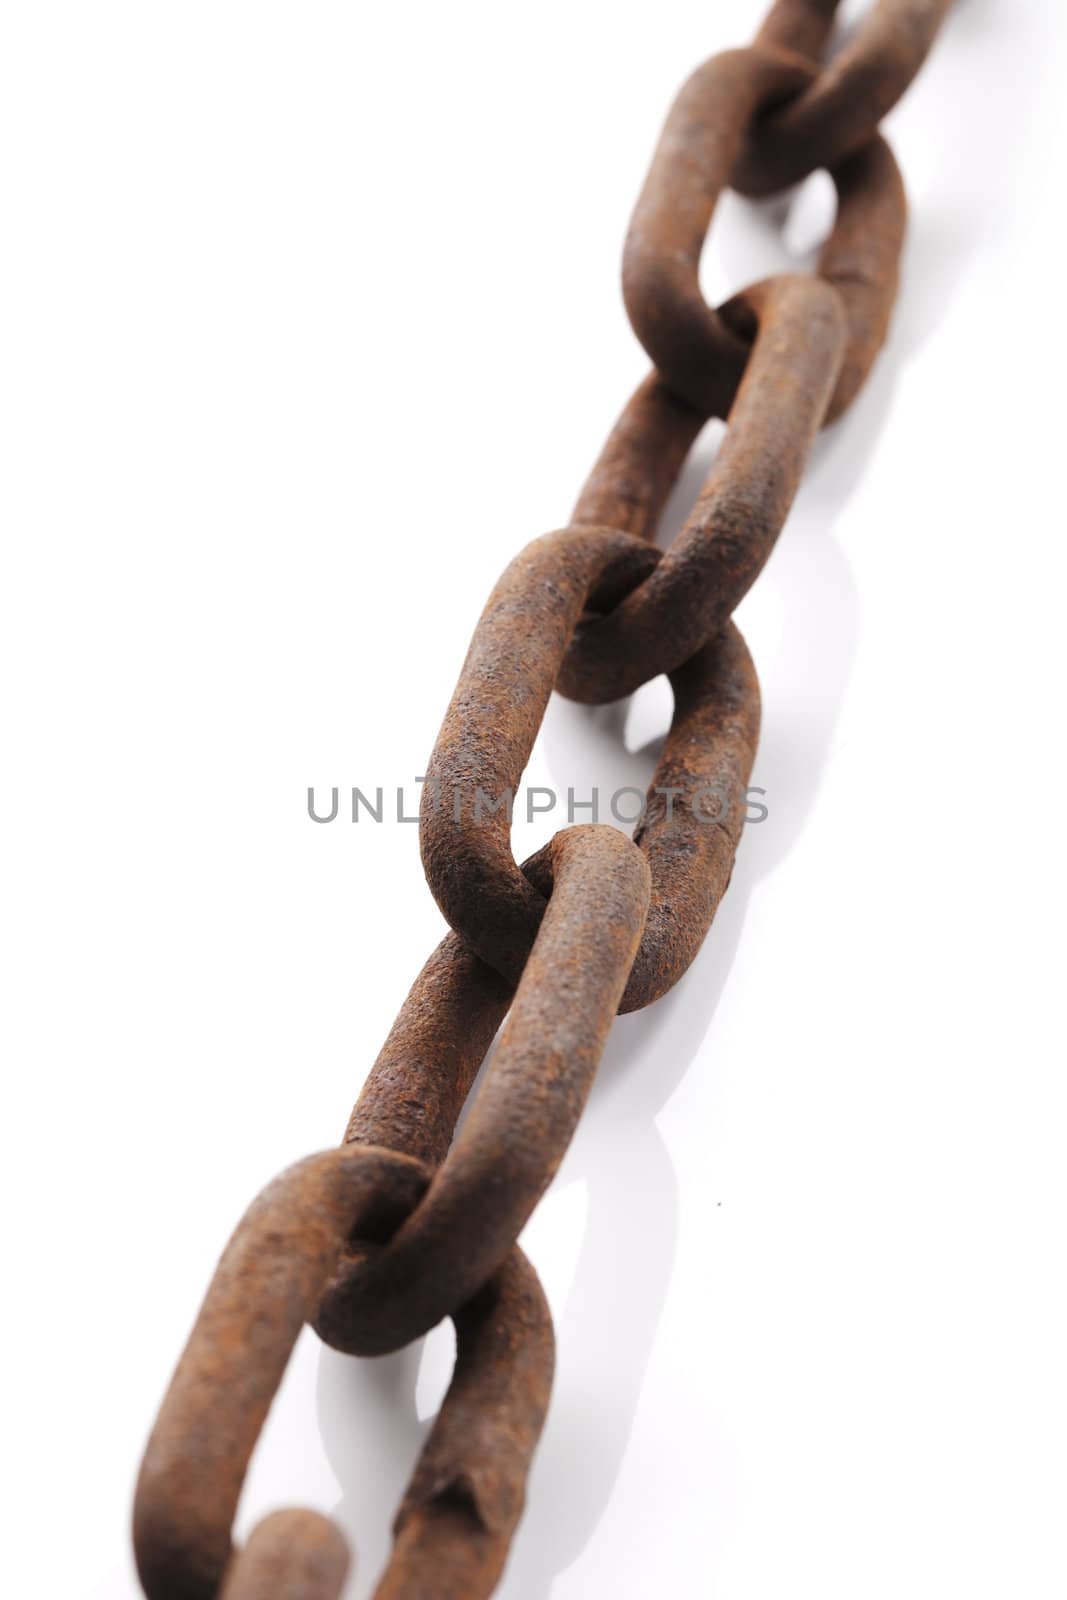 Old chain by Stocksnapper